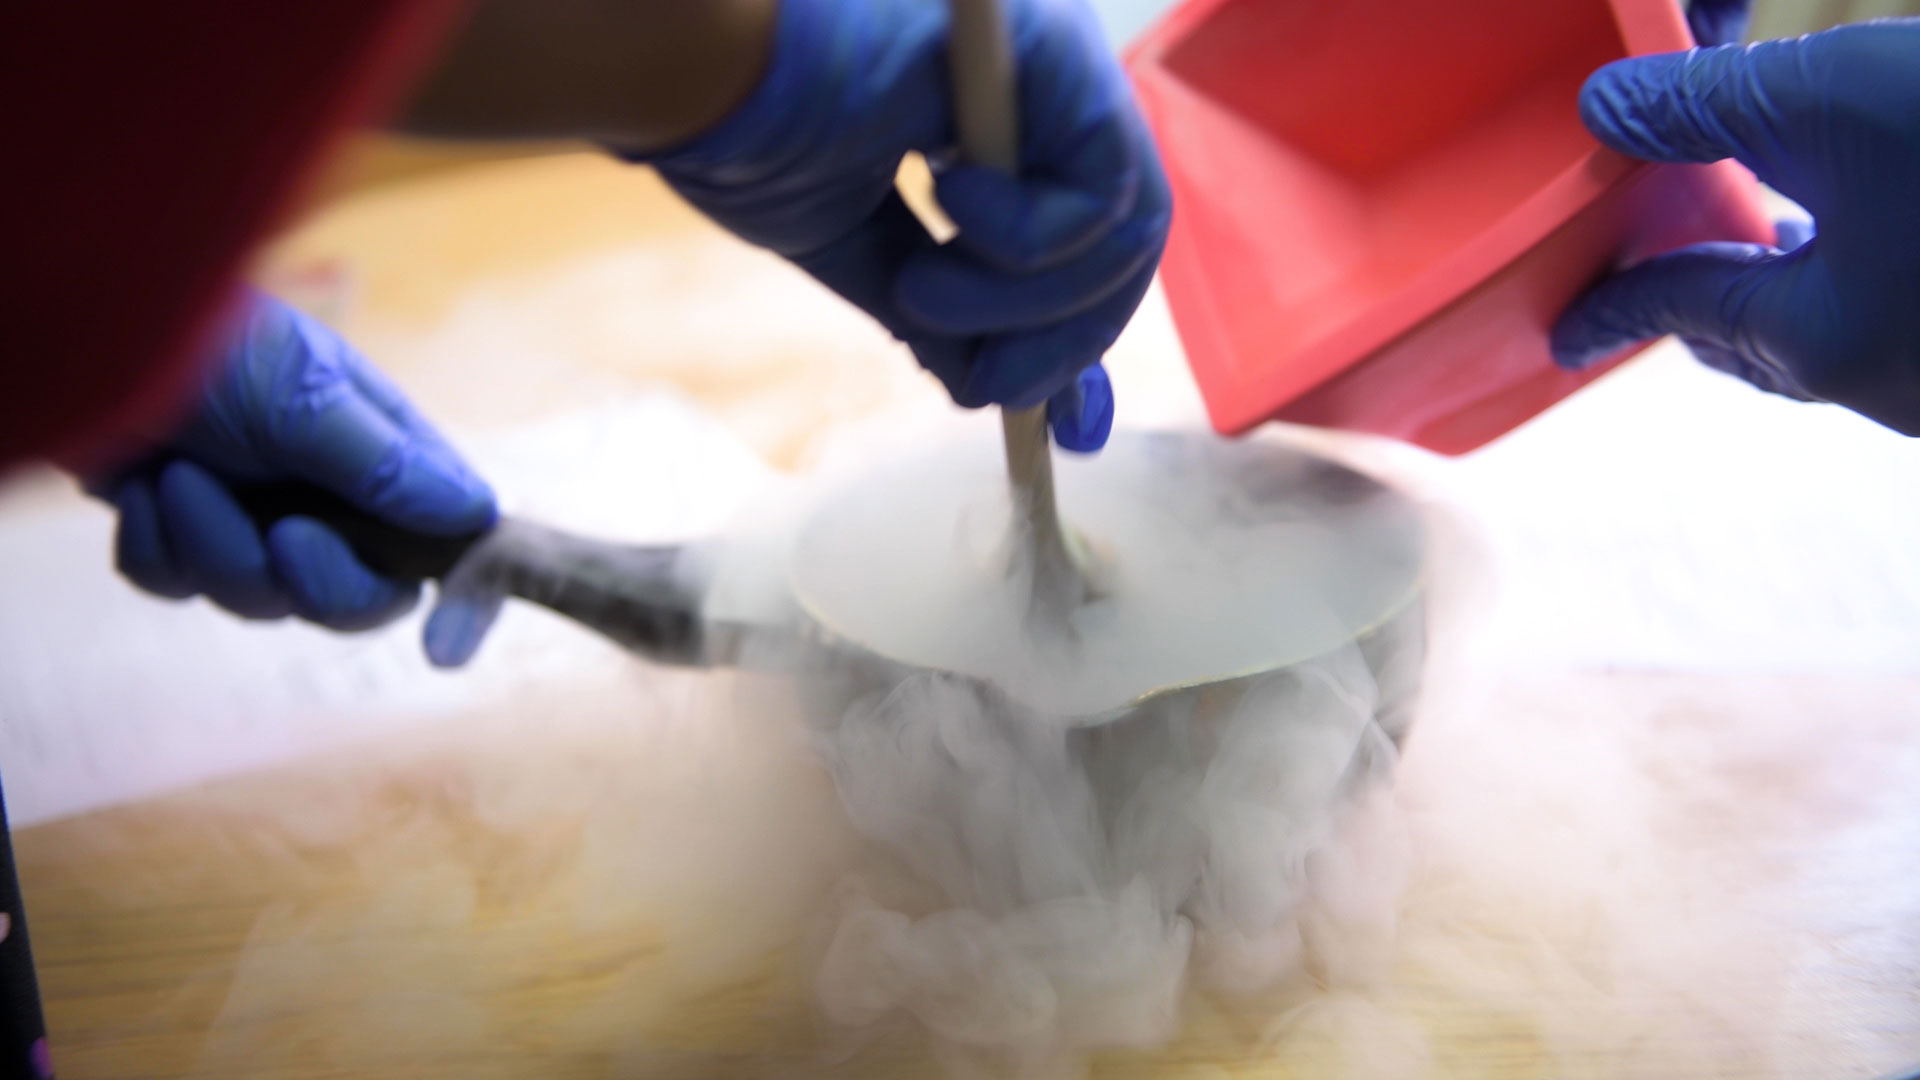 Liquid nitrogen pouring from pan